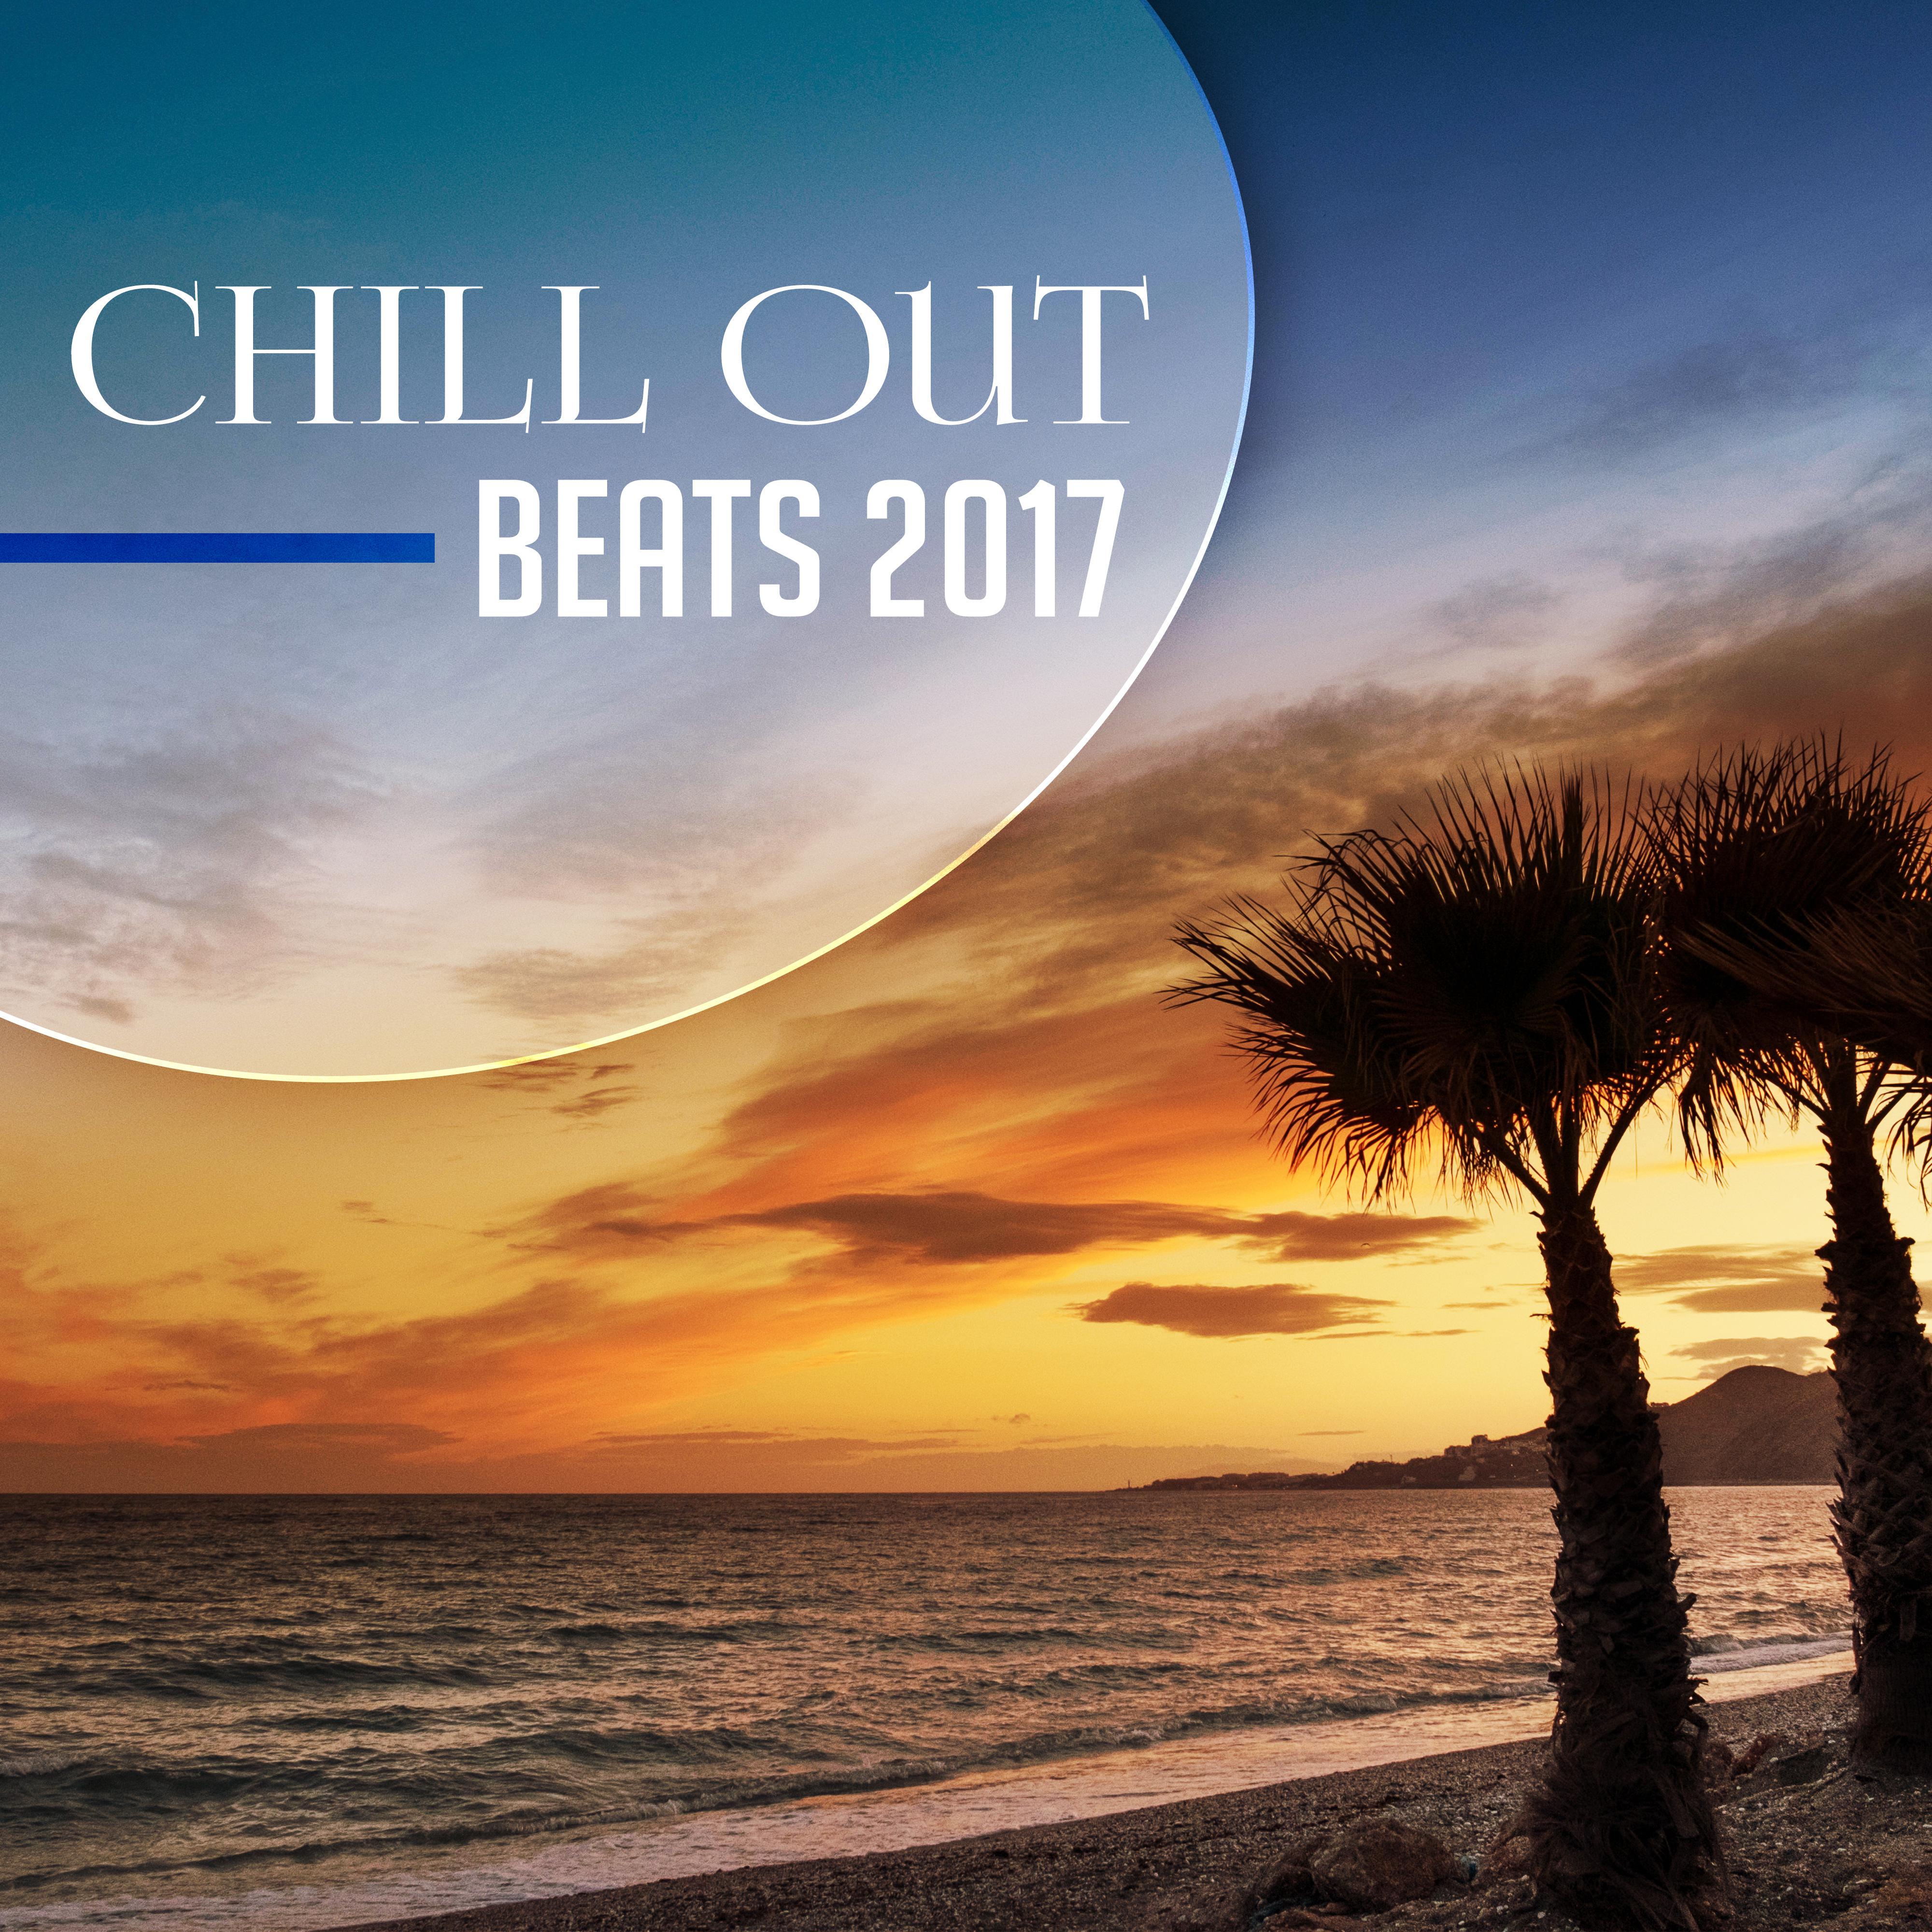 Chill Out Beats 2017  Calm Summer Chill, Stress Relief, Chilled Waves, Holiday Music